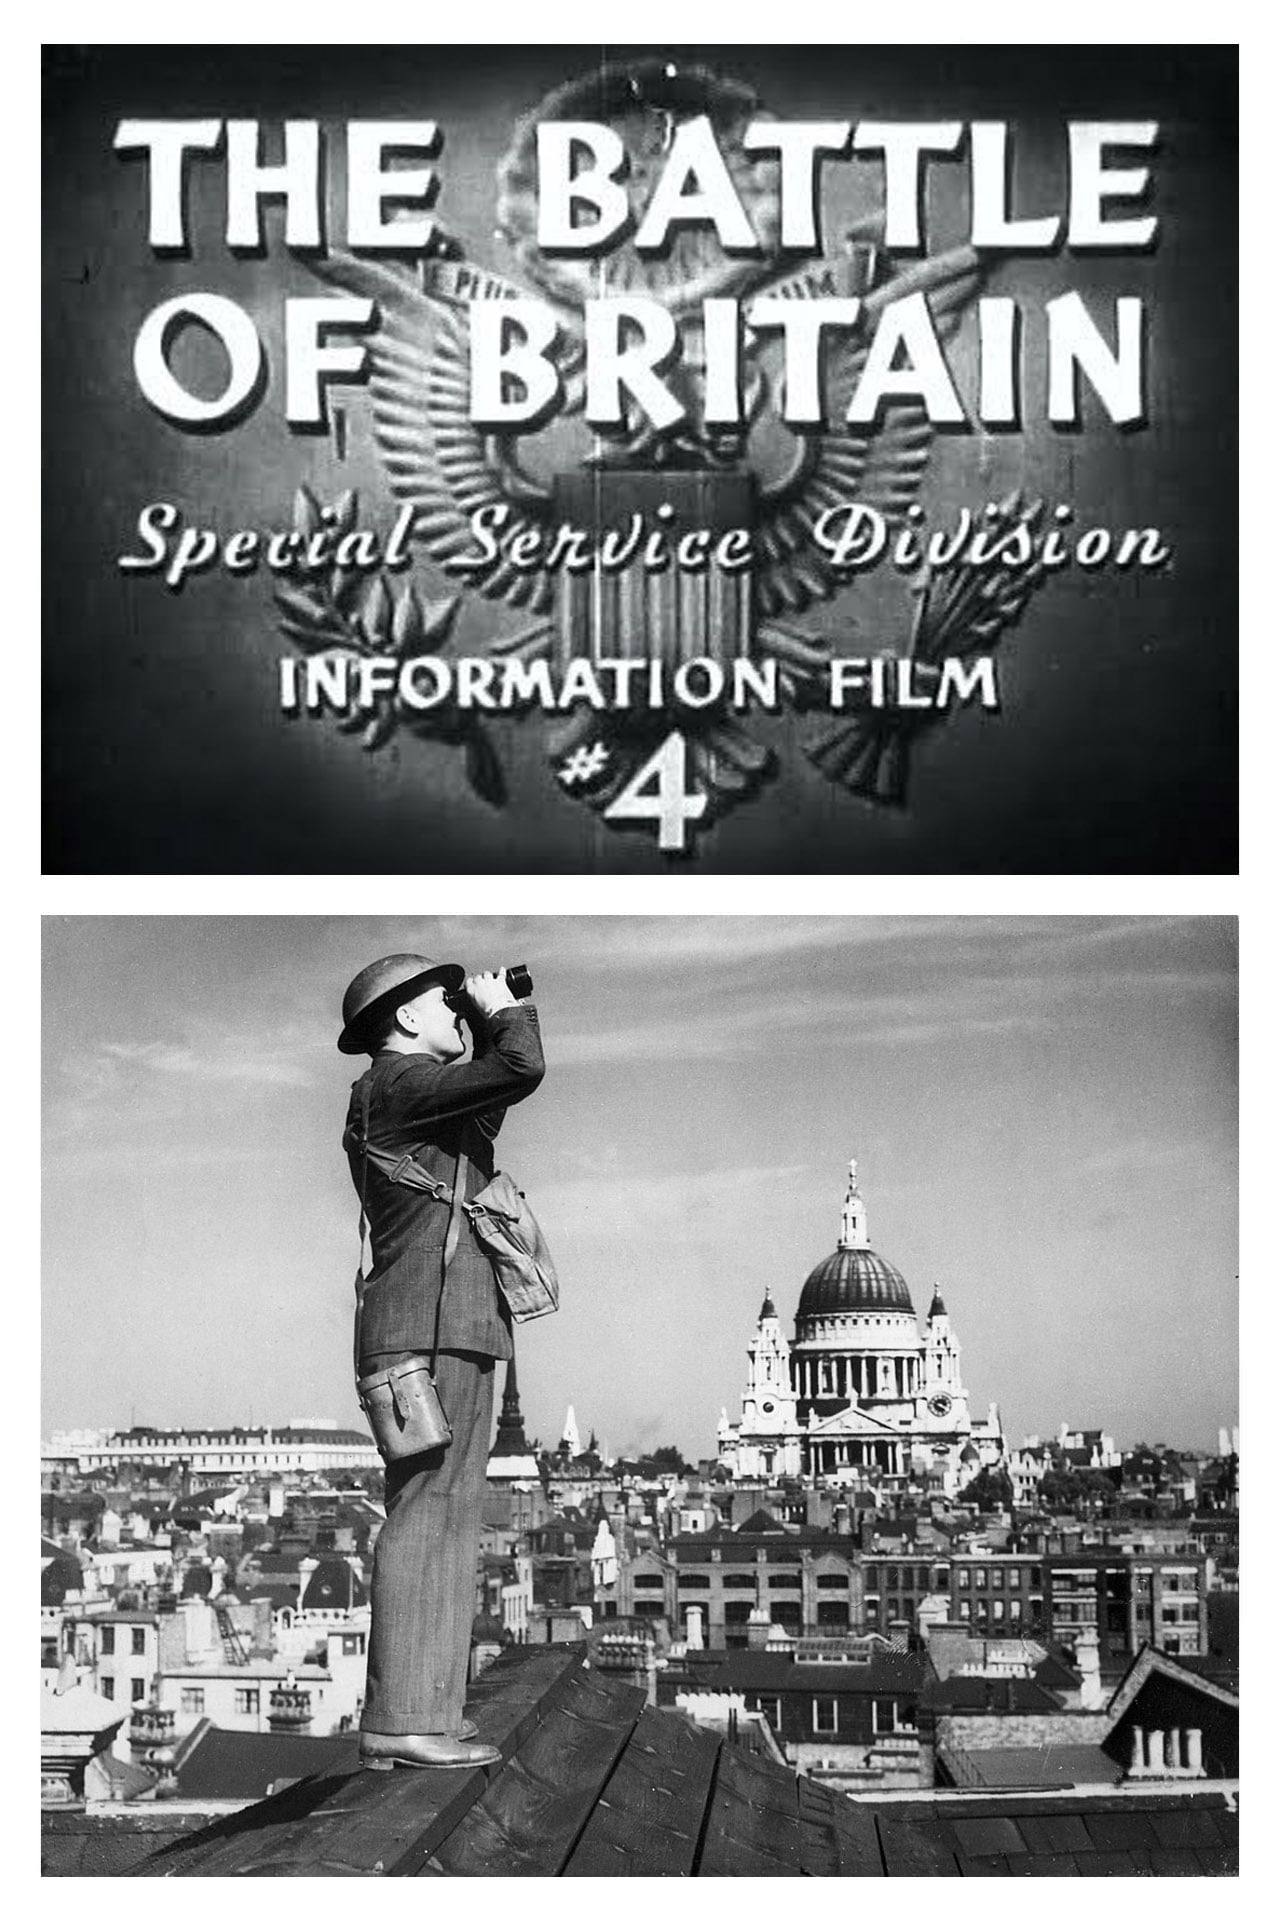 Why We Fight: The Battle of Britain film